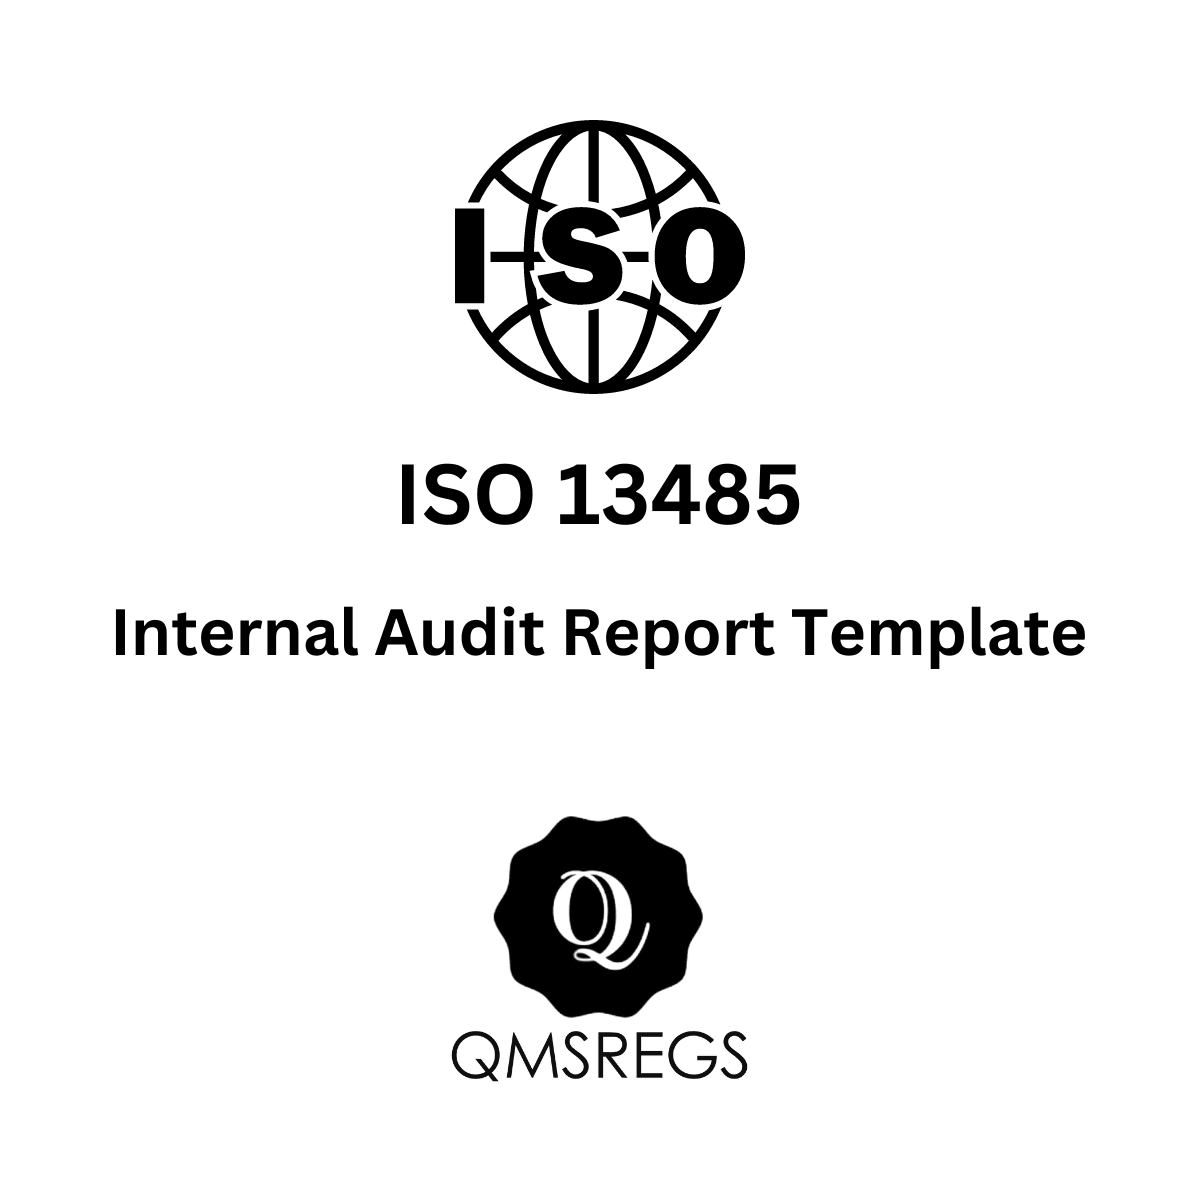 ISO 13485 Internal Audit Report Template